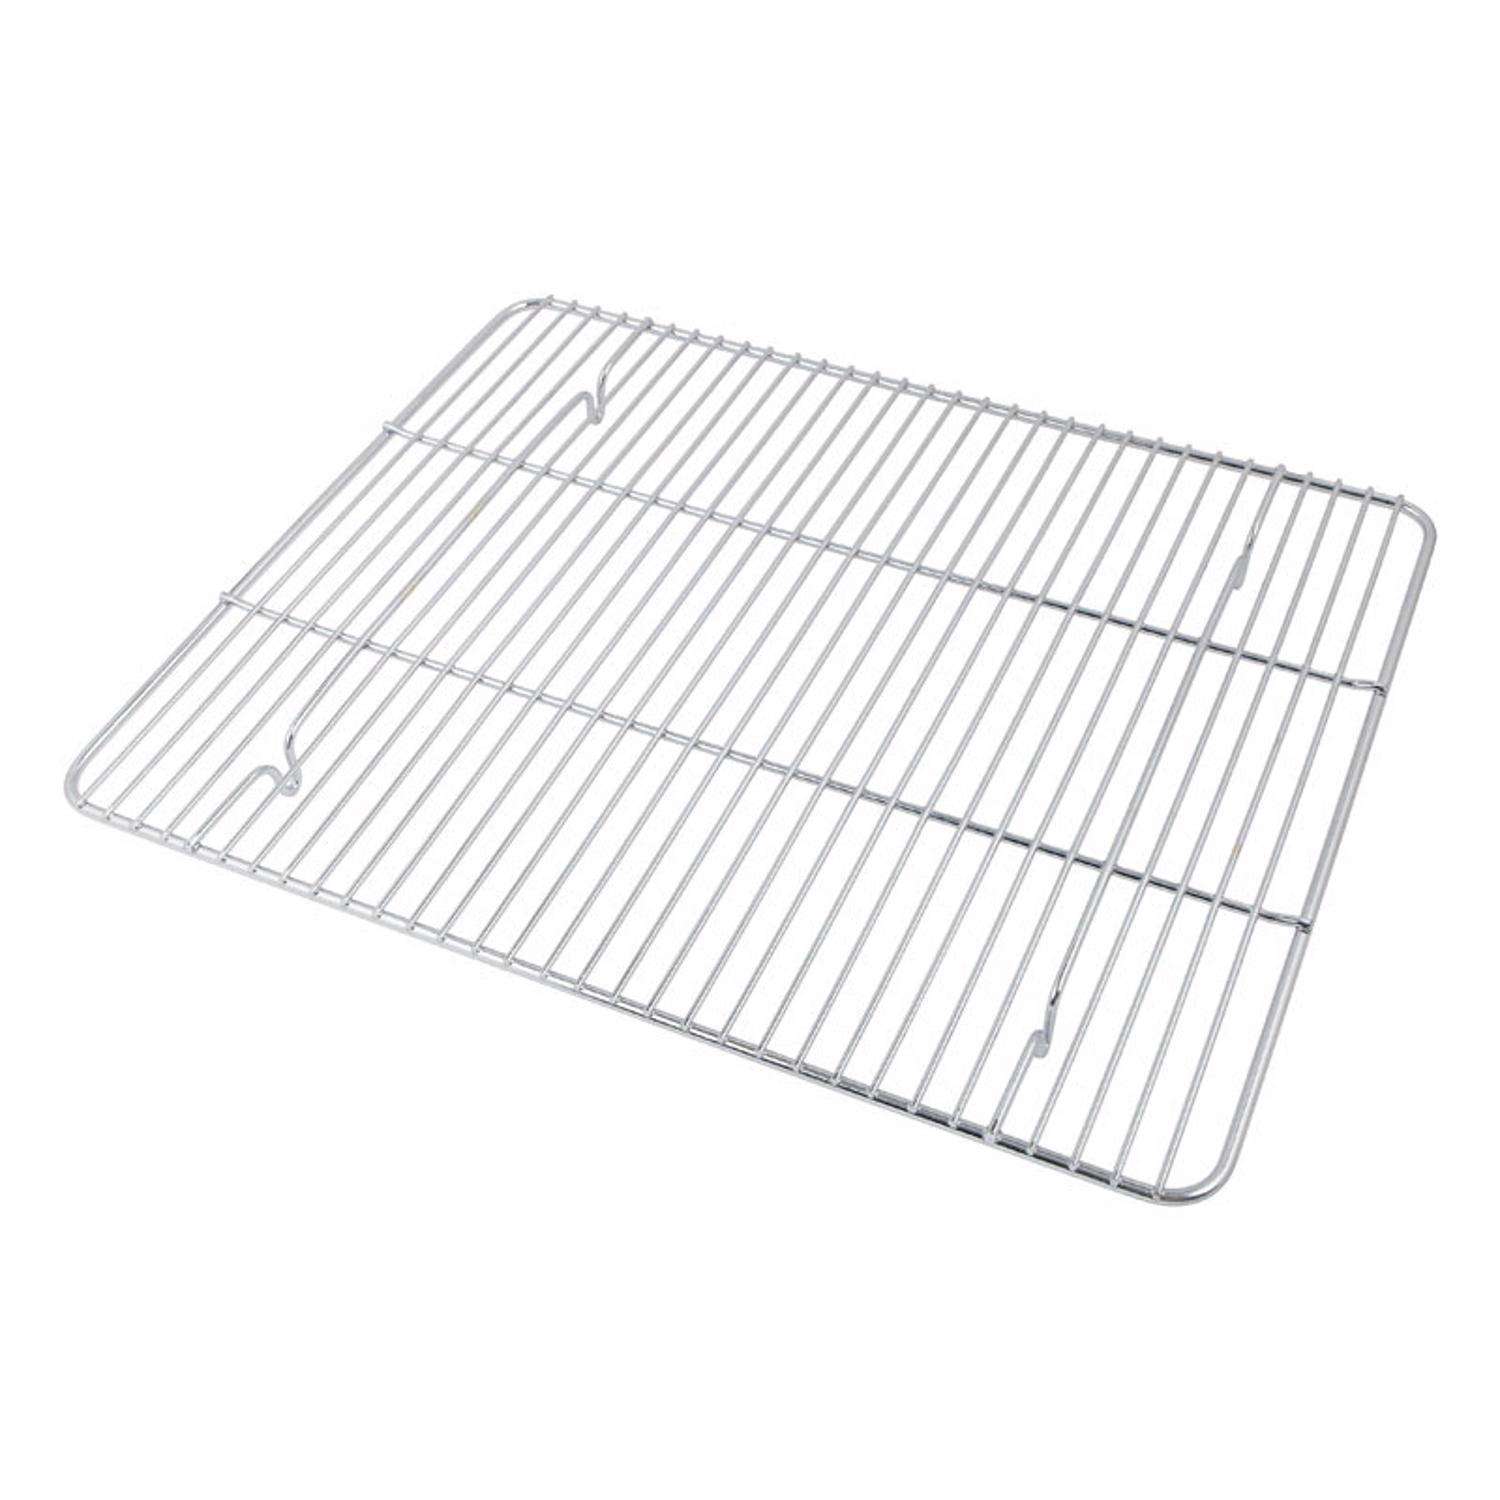 Set of 2) Stainless Steel Baking & Cooling Racks - Silver - Bed Bath &  Beyond - 31662831